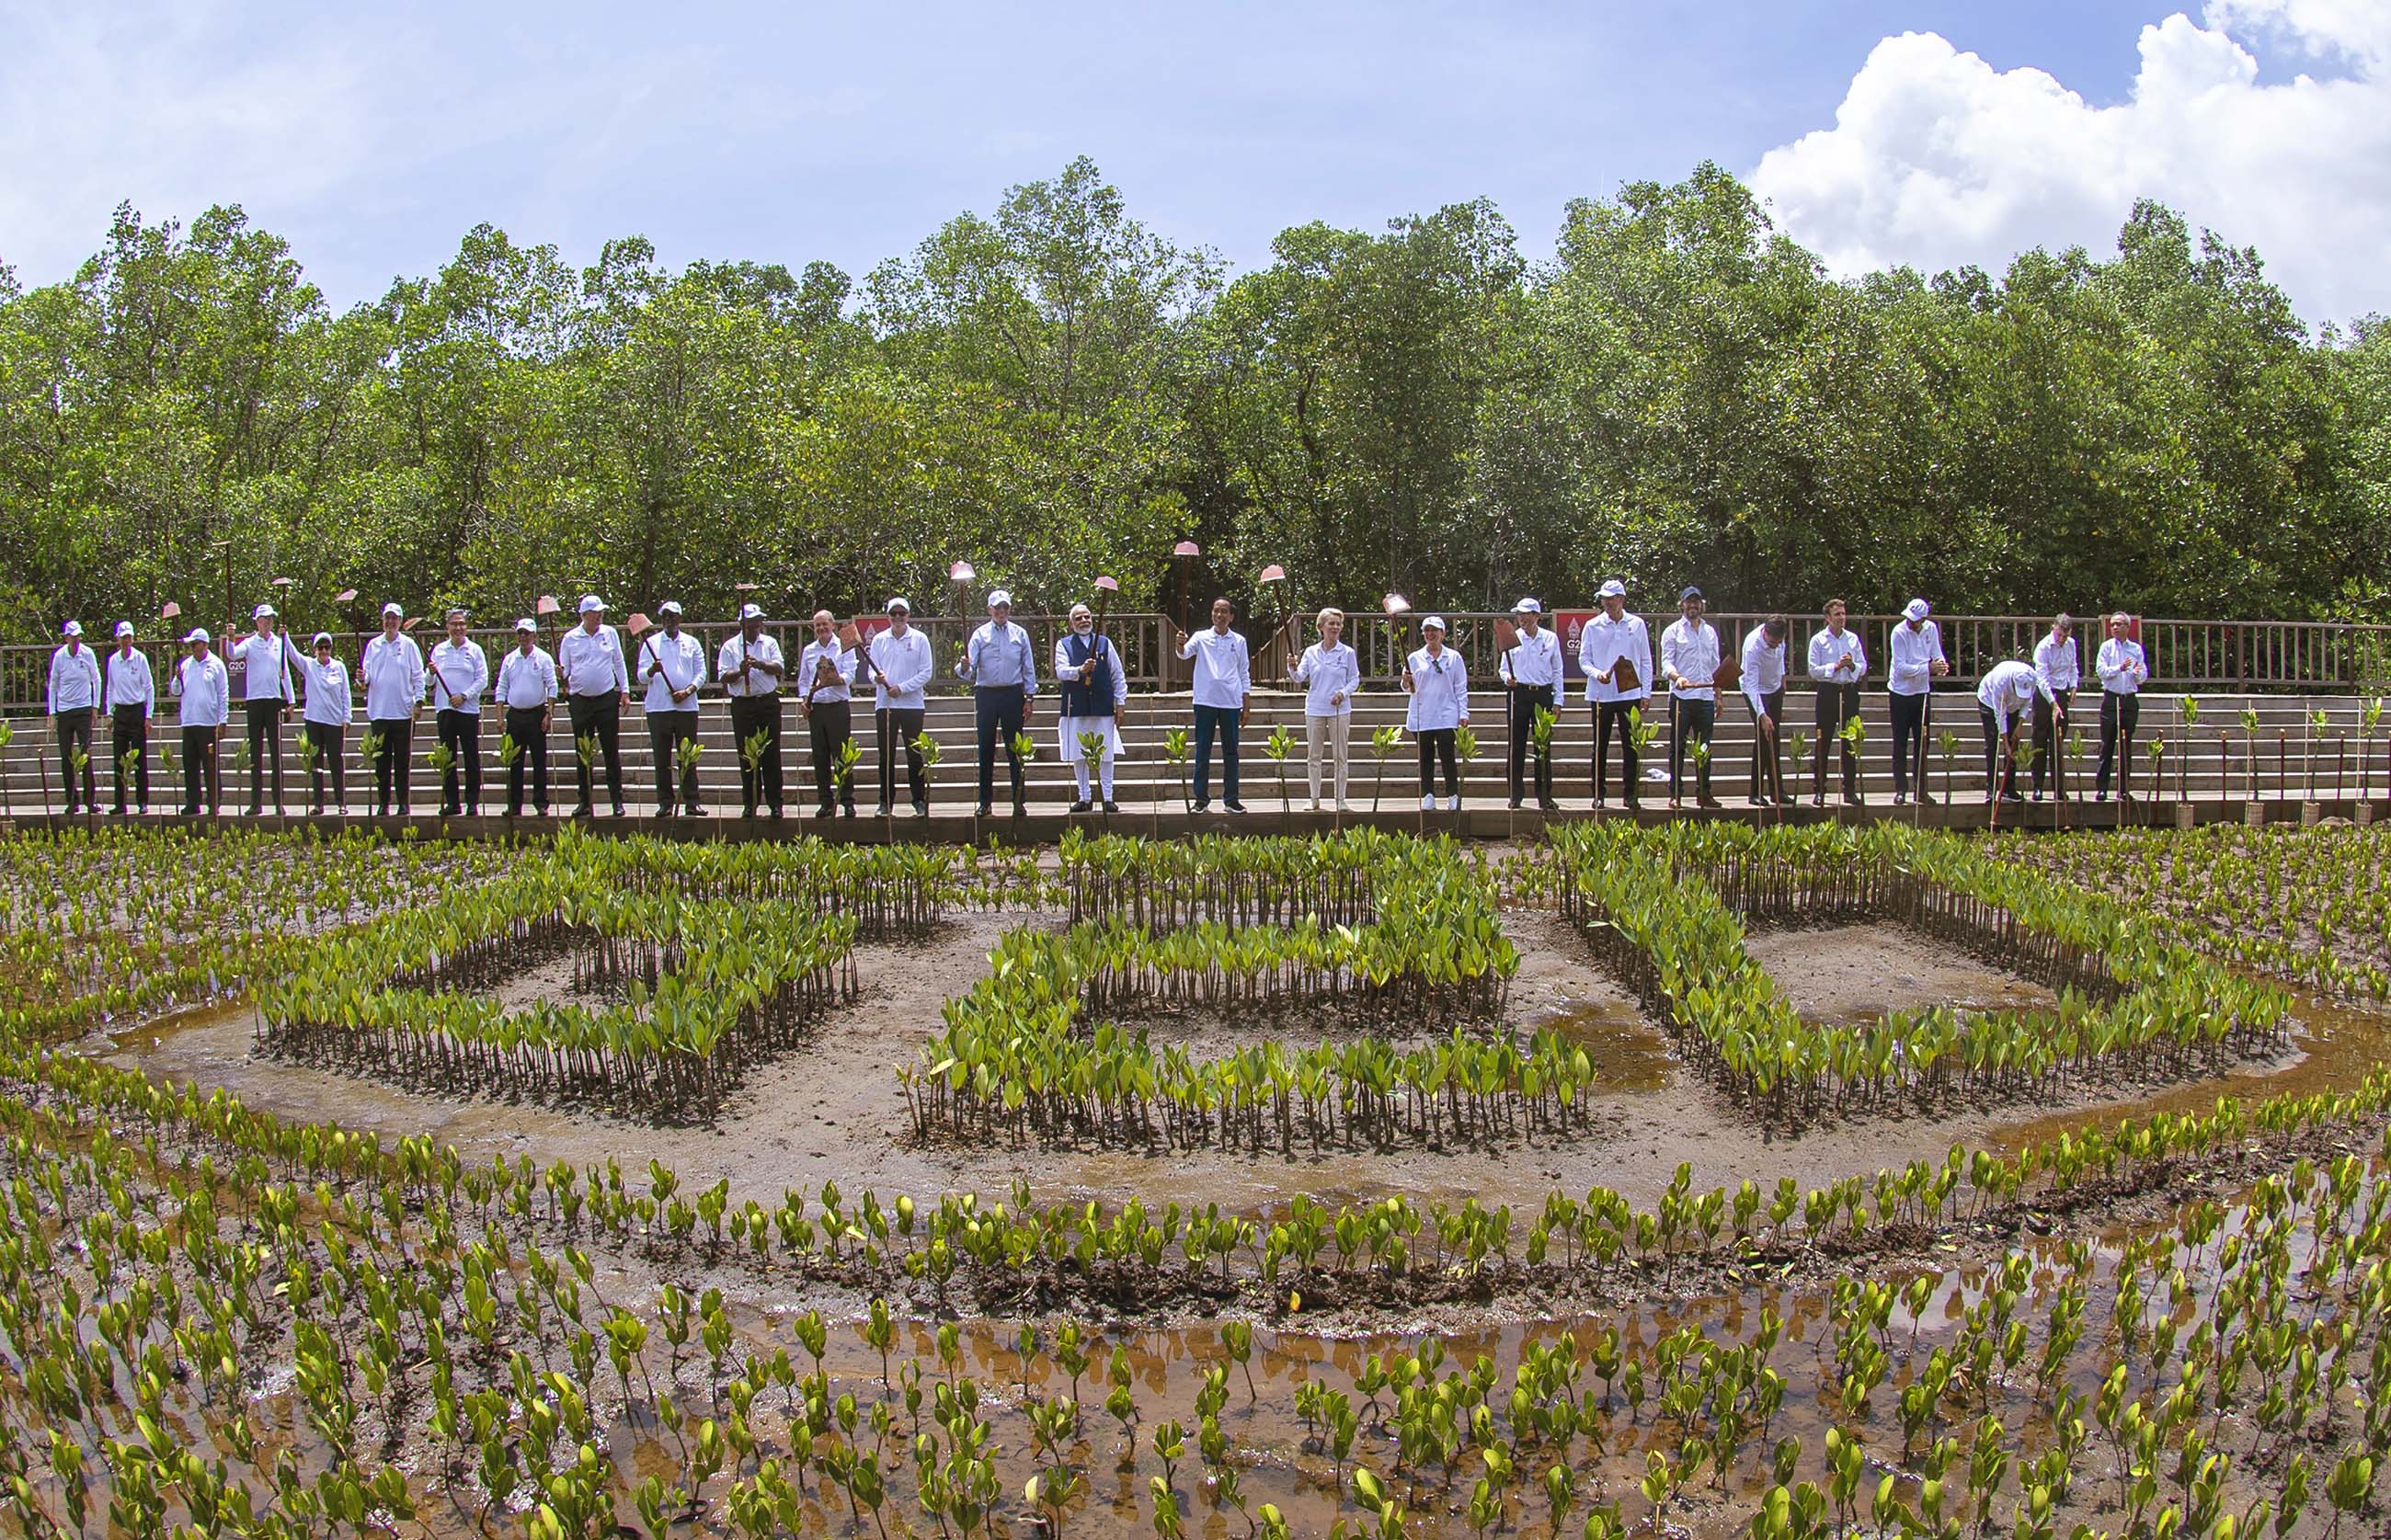 Prime Minister Kishida visiting a mangrove forest (2) (Photo credit: Host Photo Agency G20)